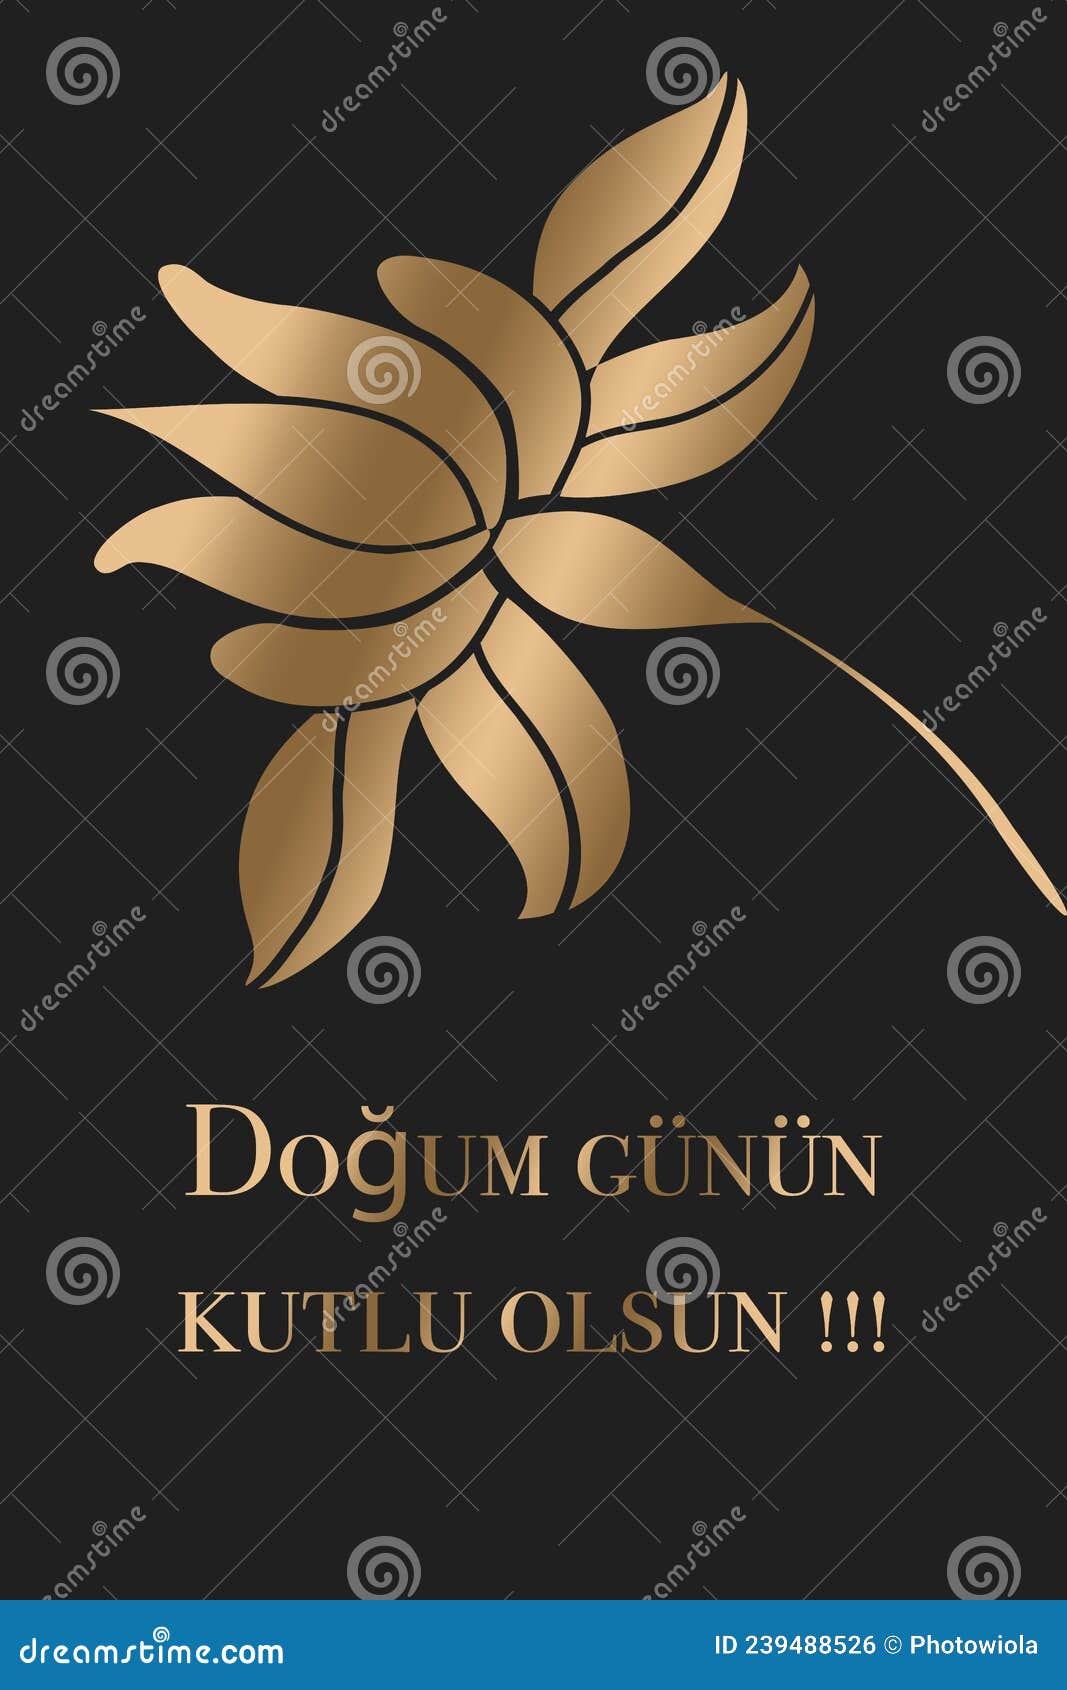 Happy Birthday Greeting Cards Design in Turkish. Golden Letters on a Dark Background Stock Illustration - Illustration of celebration, congratulations: 239488526